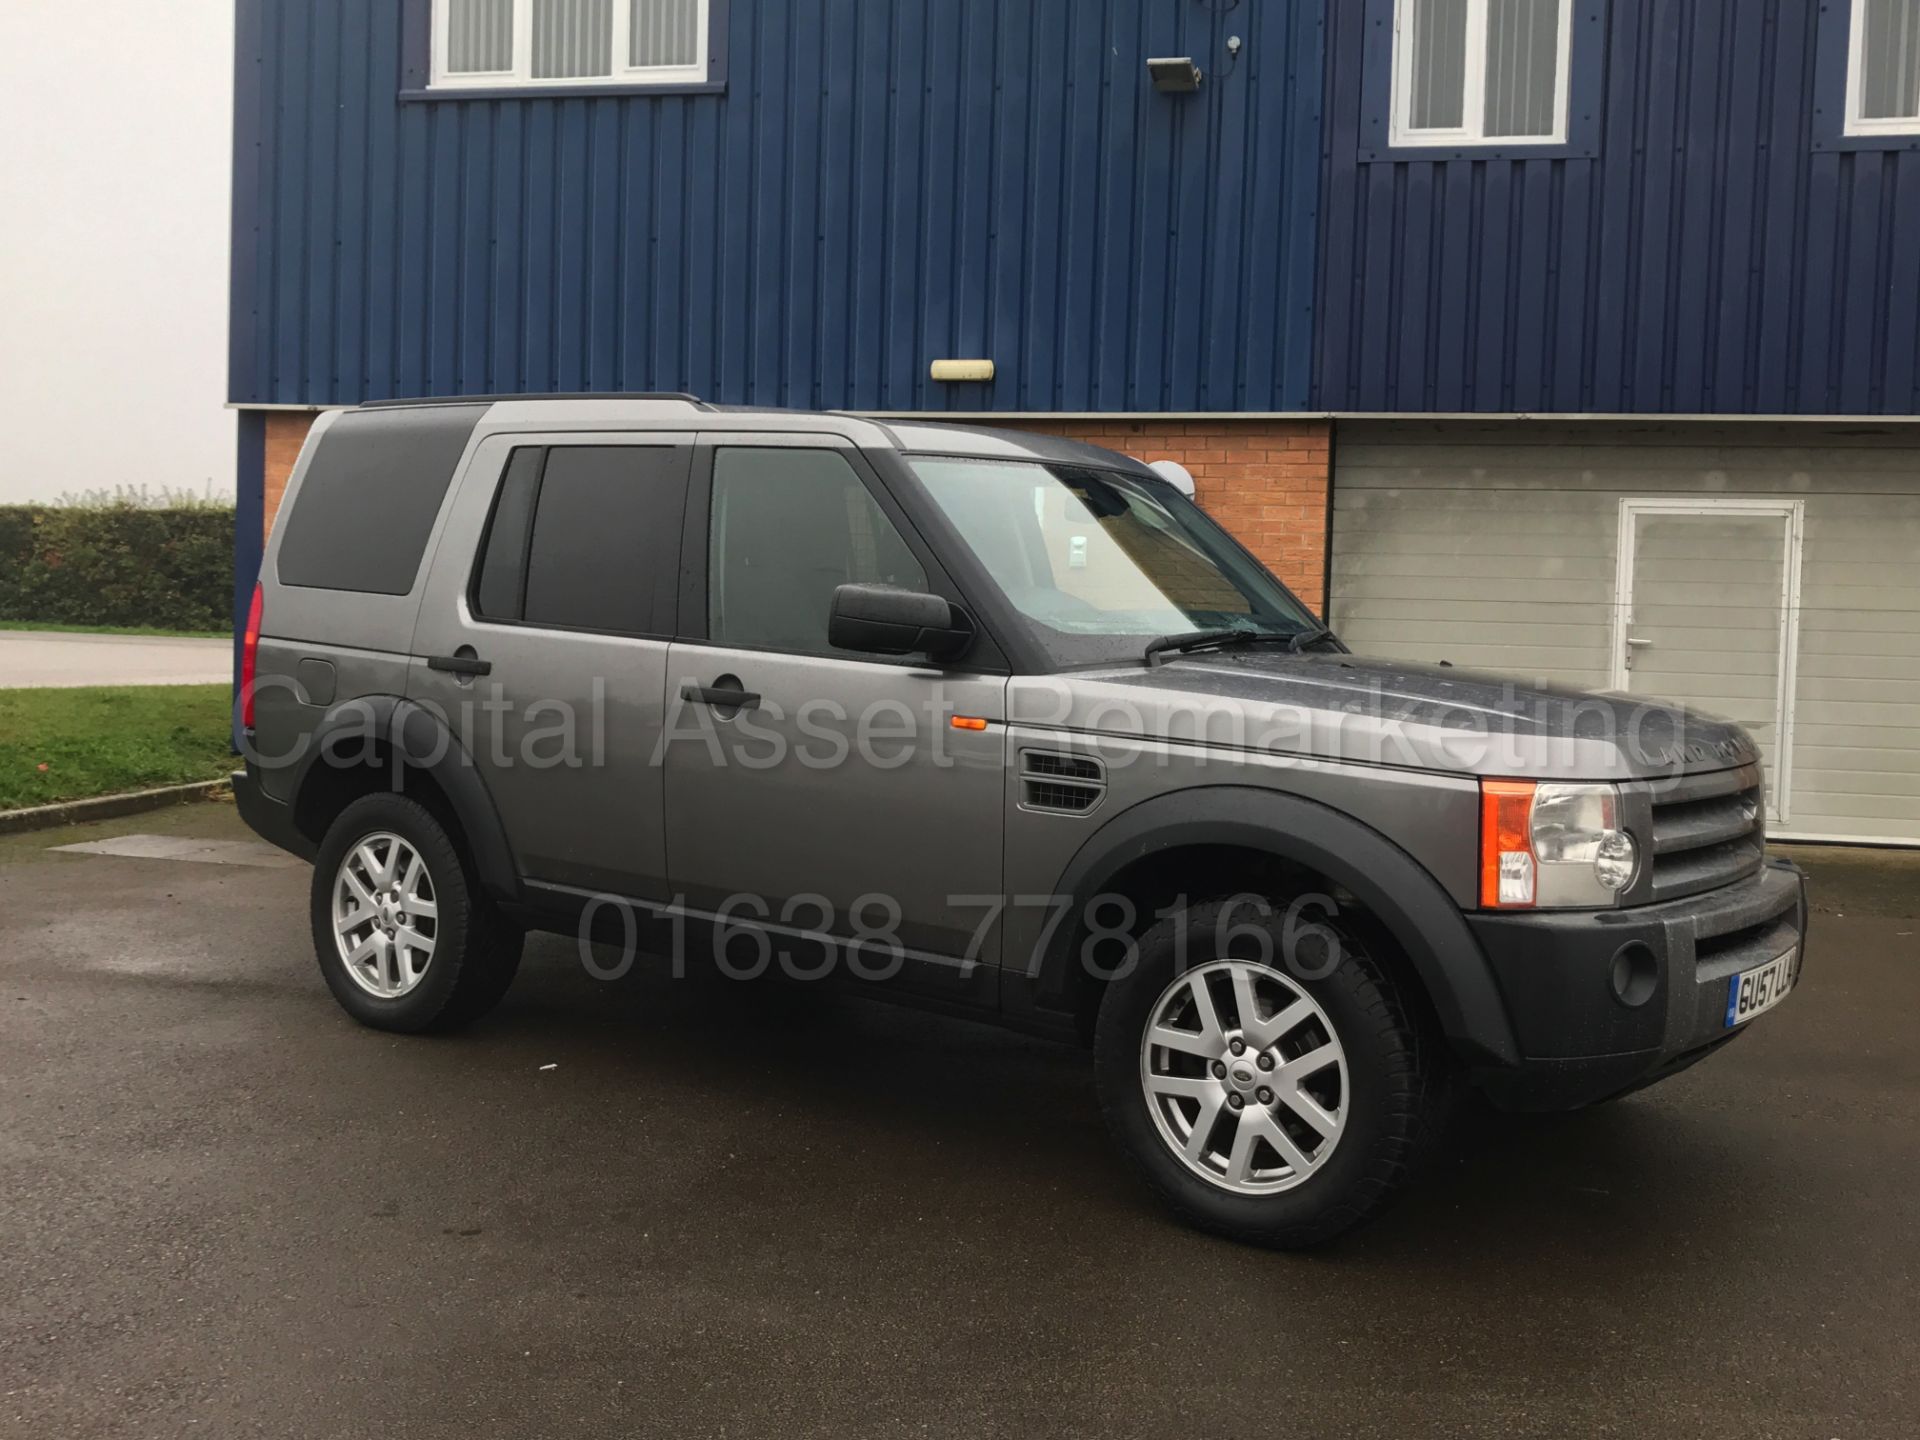 (On Sale) LAND ROVER DISCOVERY 3 XS 'COMMERCIAL' (2008 MODEL) 'TDV6 - 190 BHP - AUTO' - Image 10 of 30